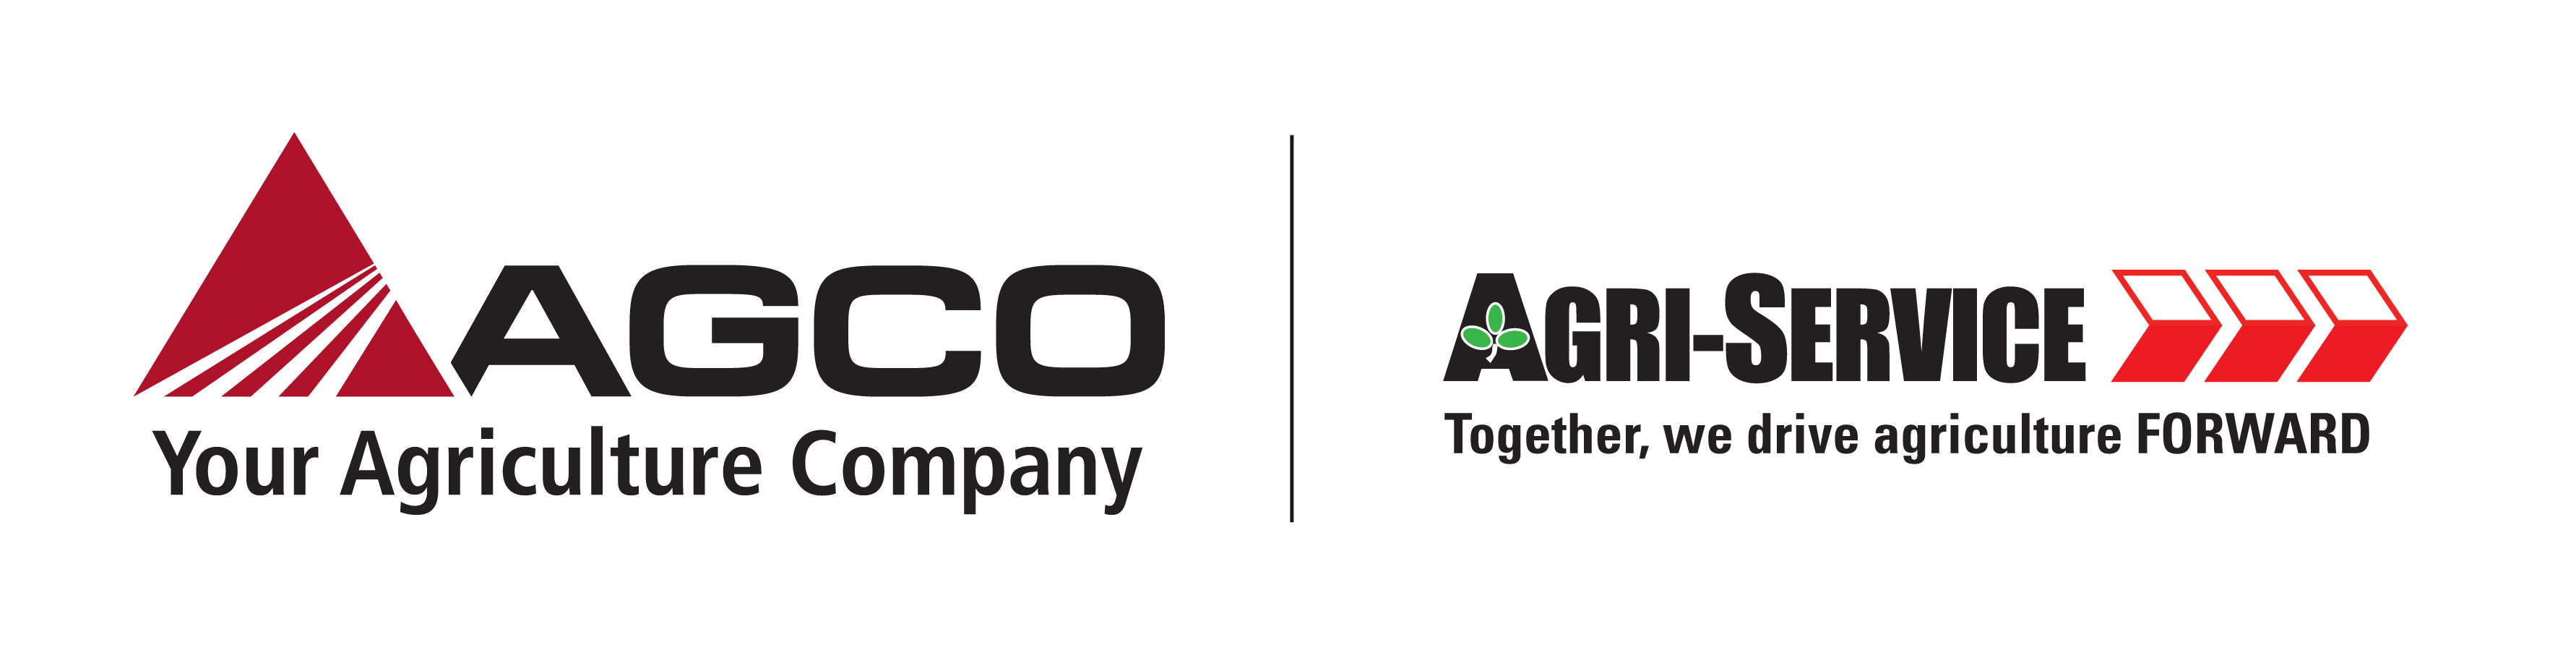 AGCO Welcomes Agri-Service Dealership Expansion in Northern Idaho